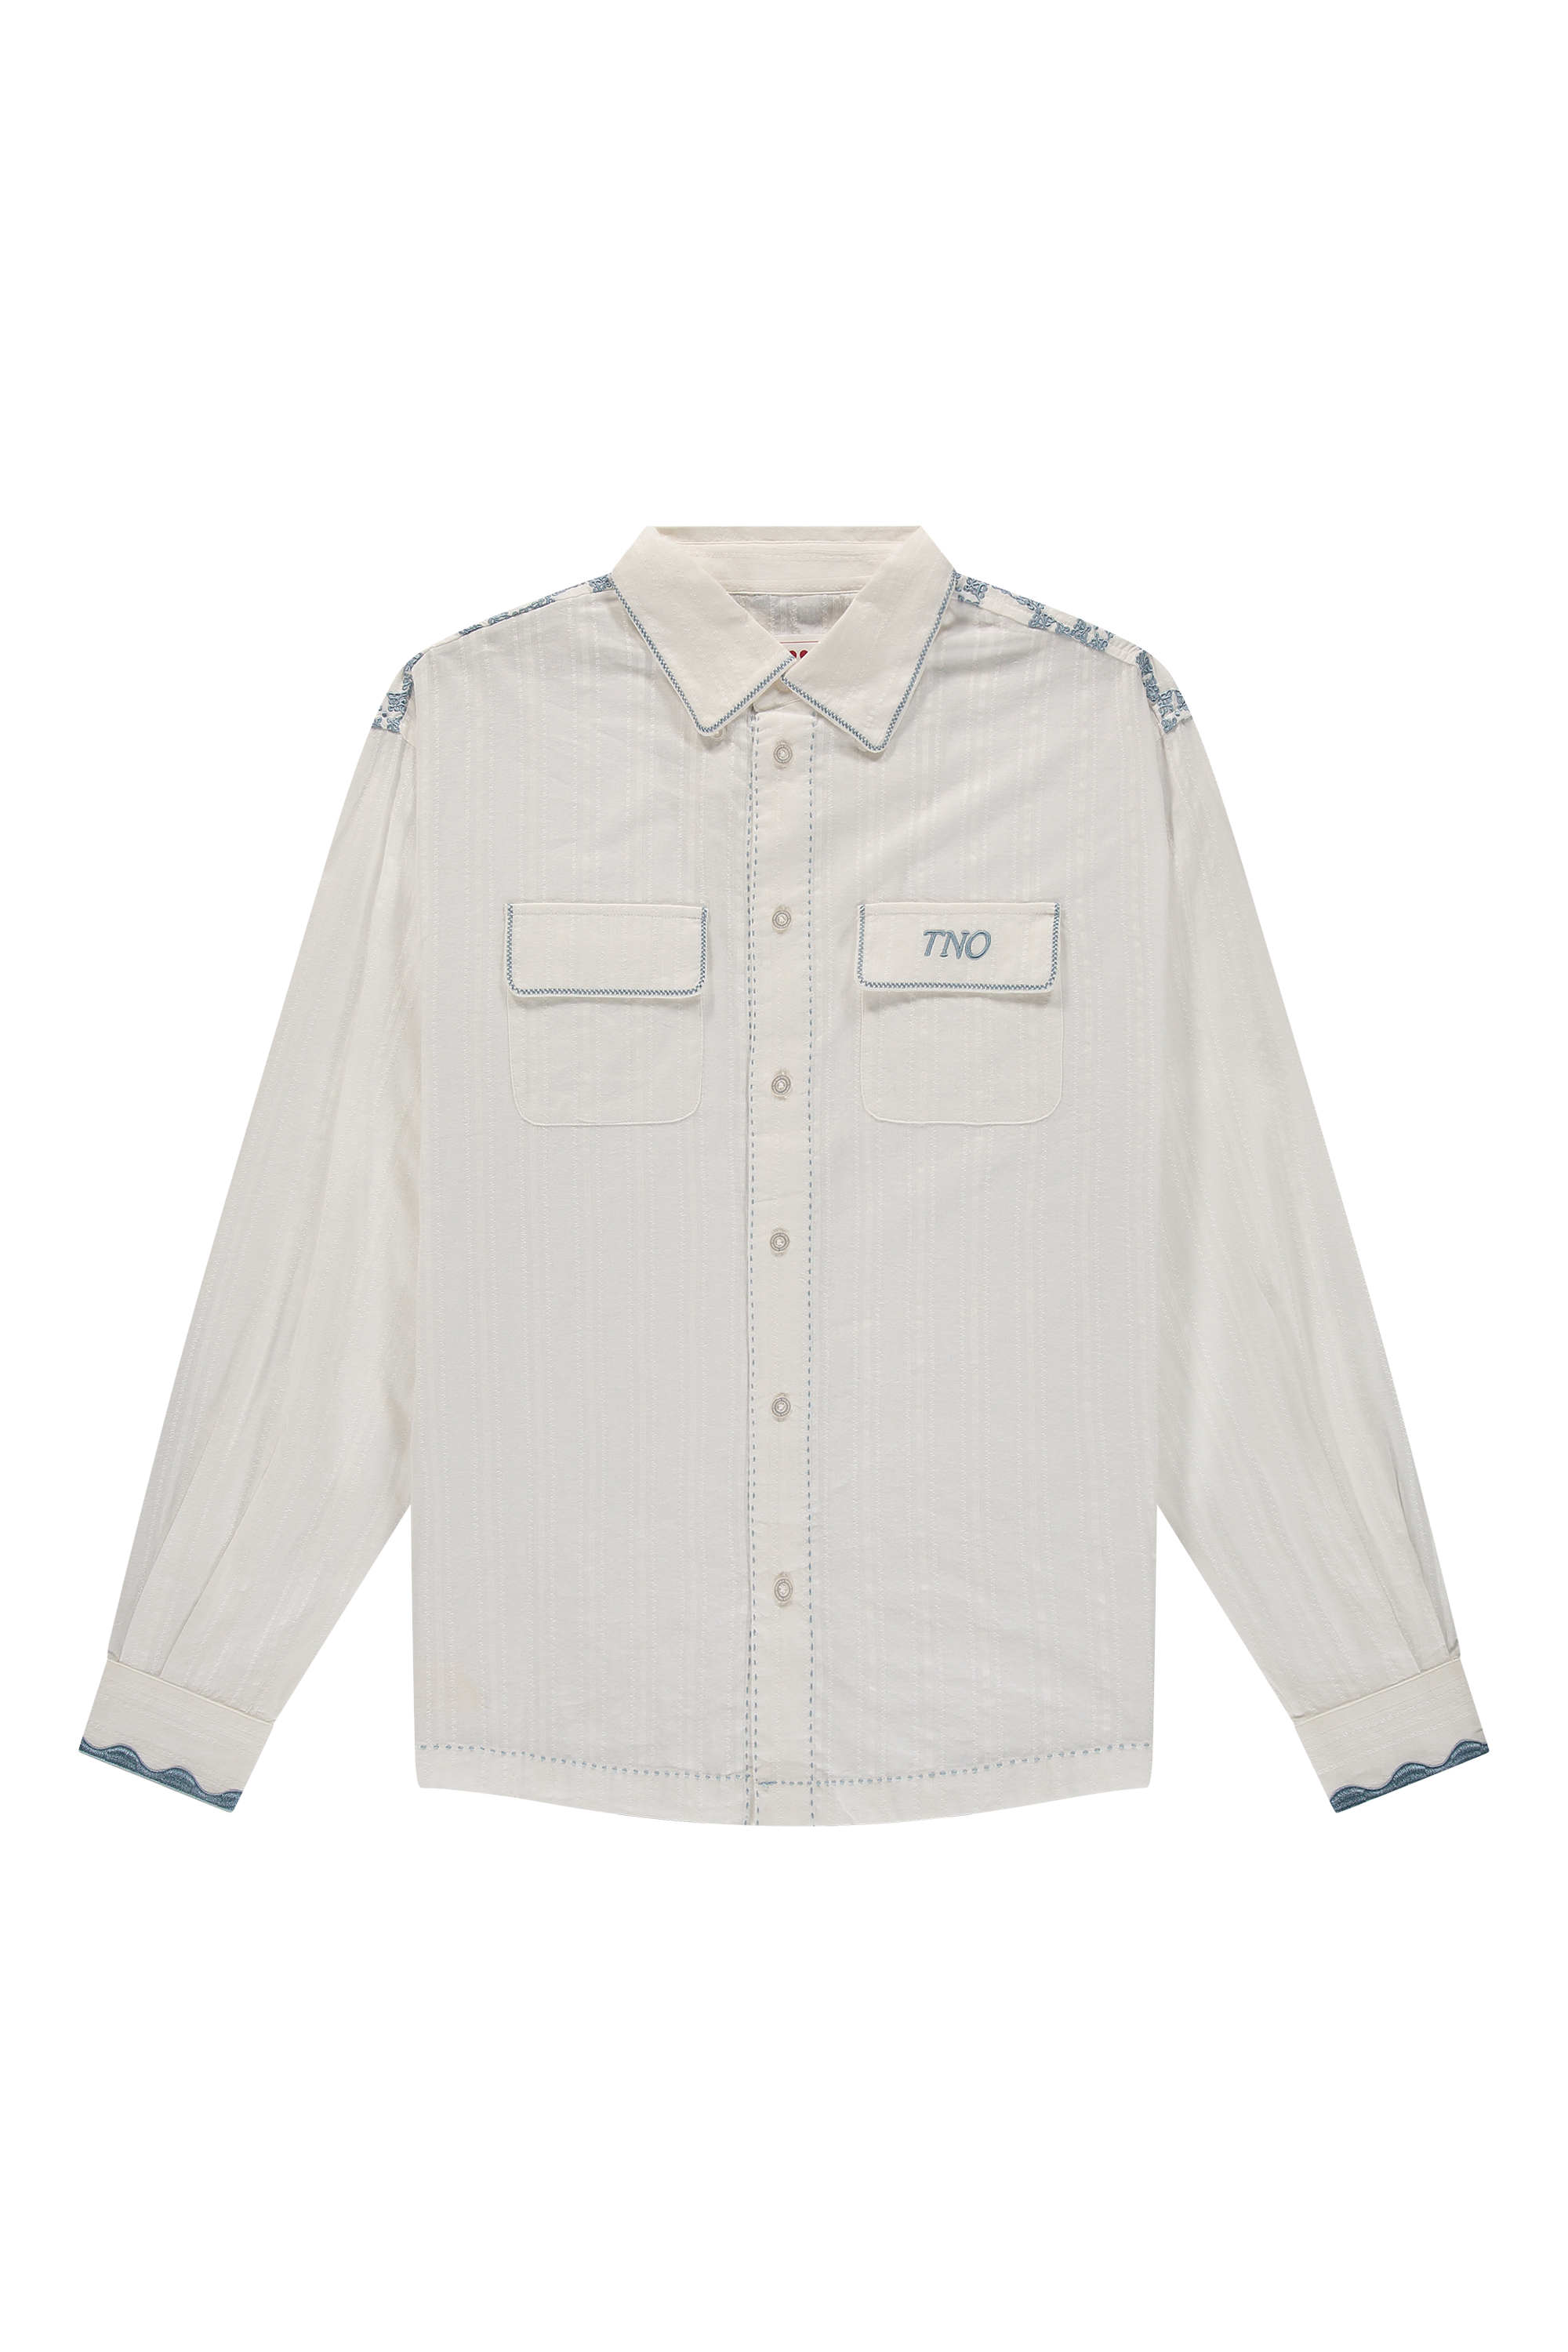 products-kitchenshirt_whitealyssum_front-png